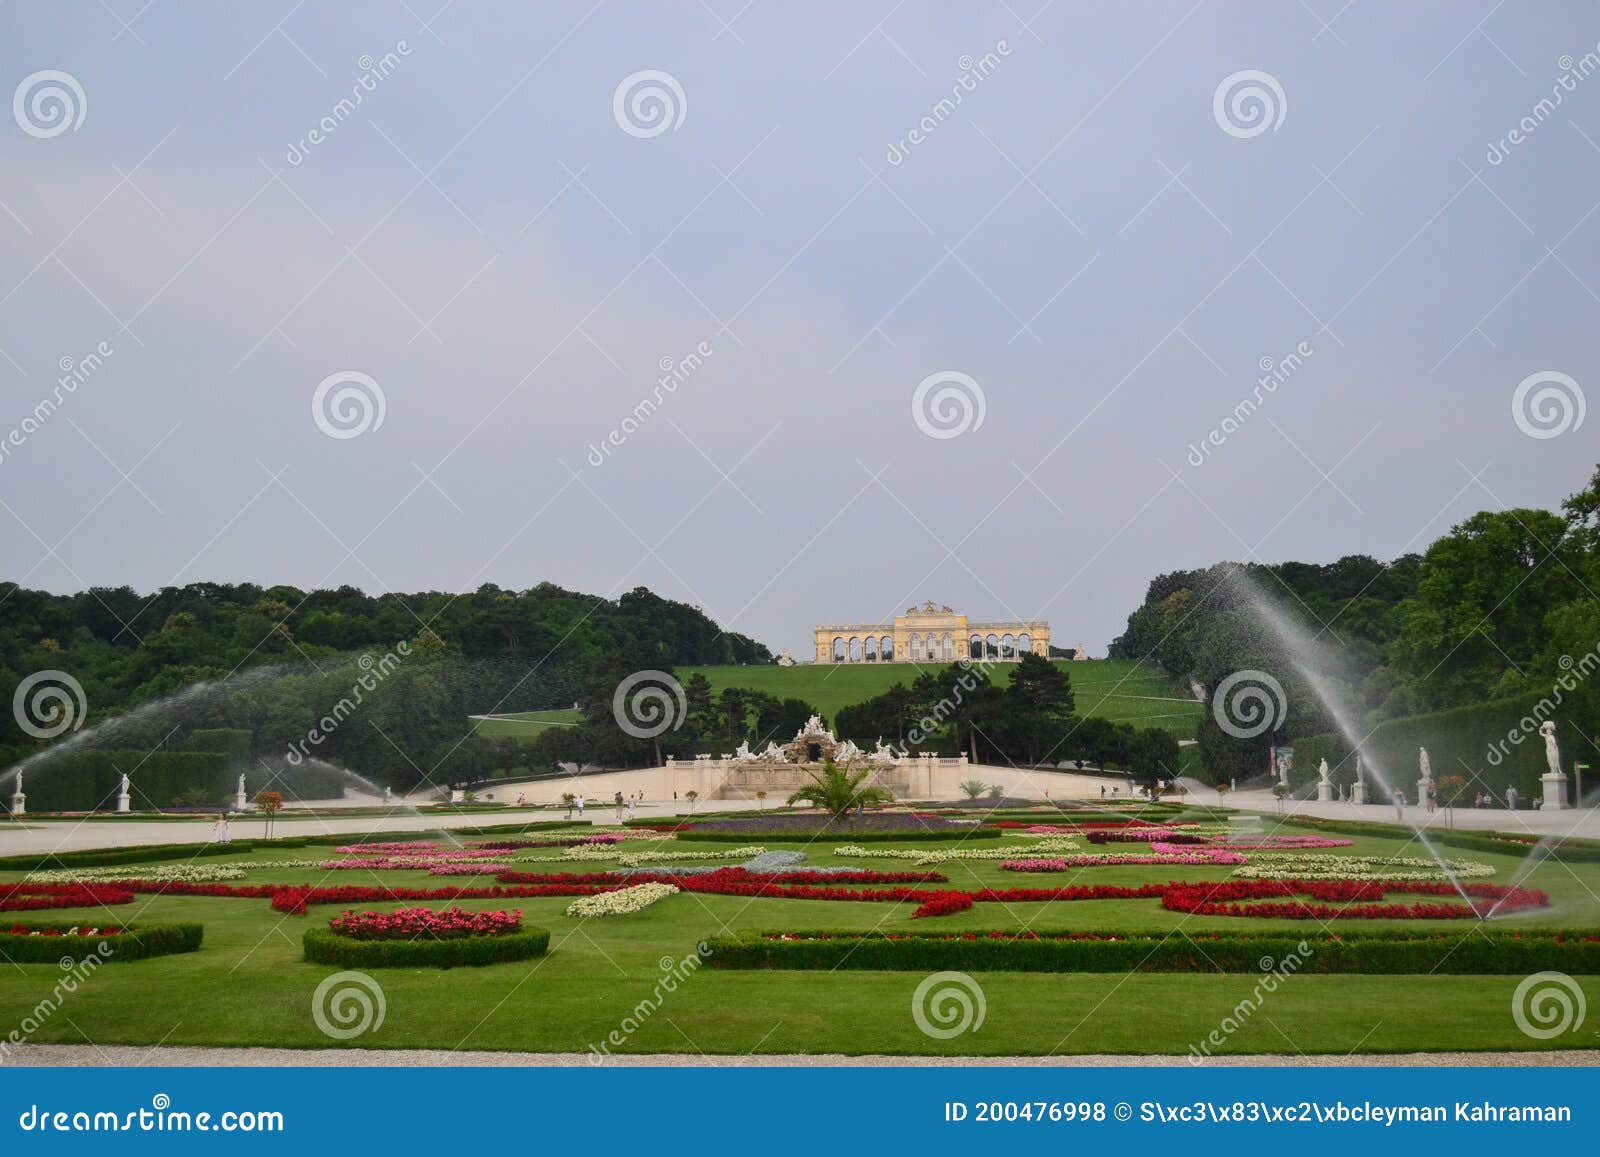 Green And Magnificent City Of Vienna Stock Photo Image Of European Mountain 200476998